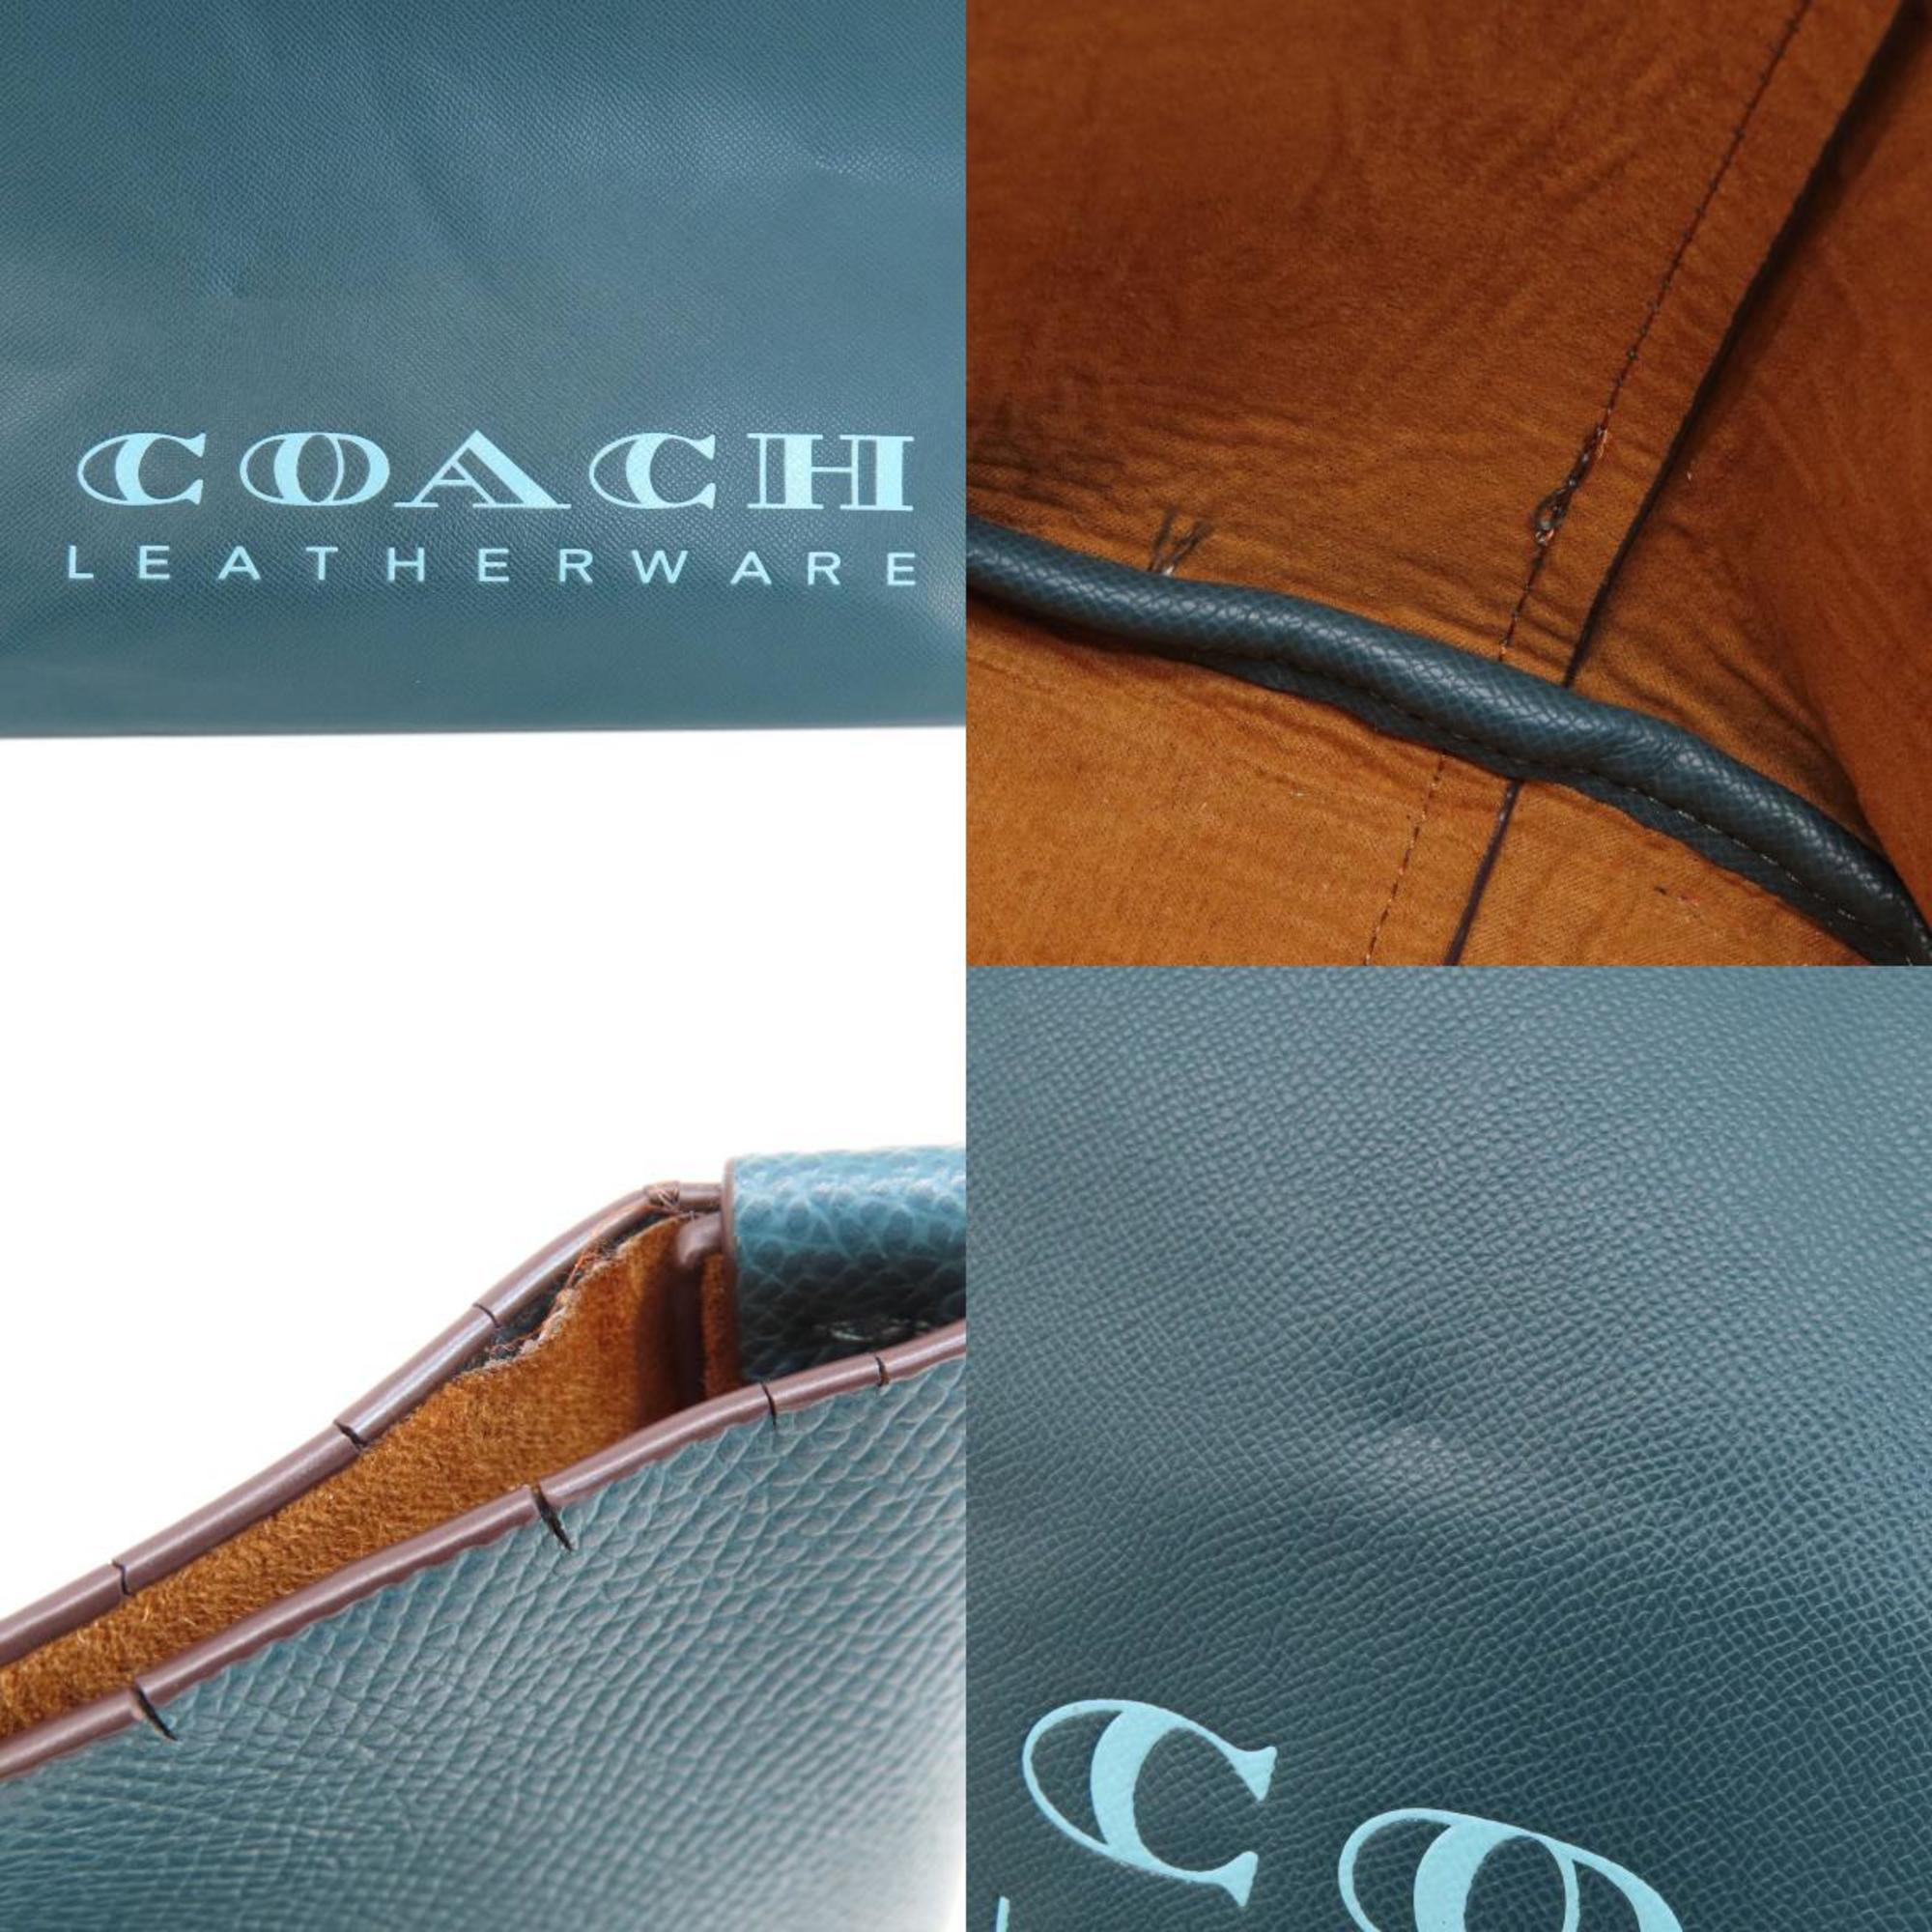 Coach 53199 Tote Bag Leather Women's